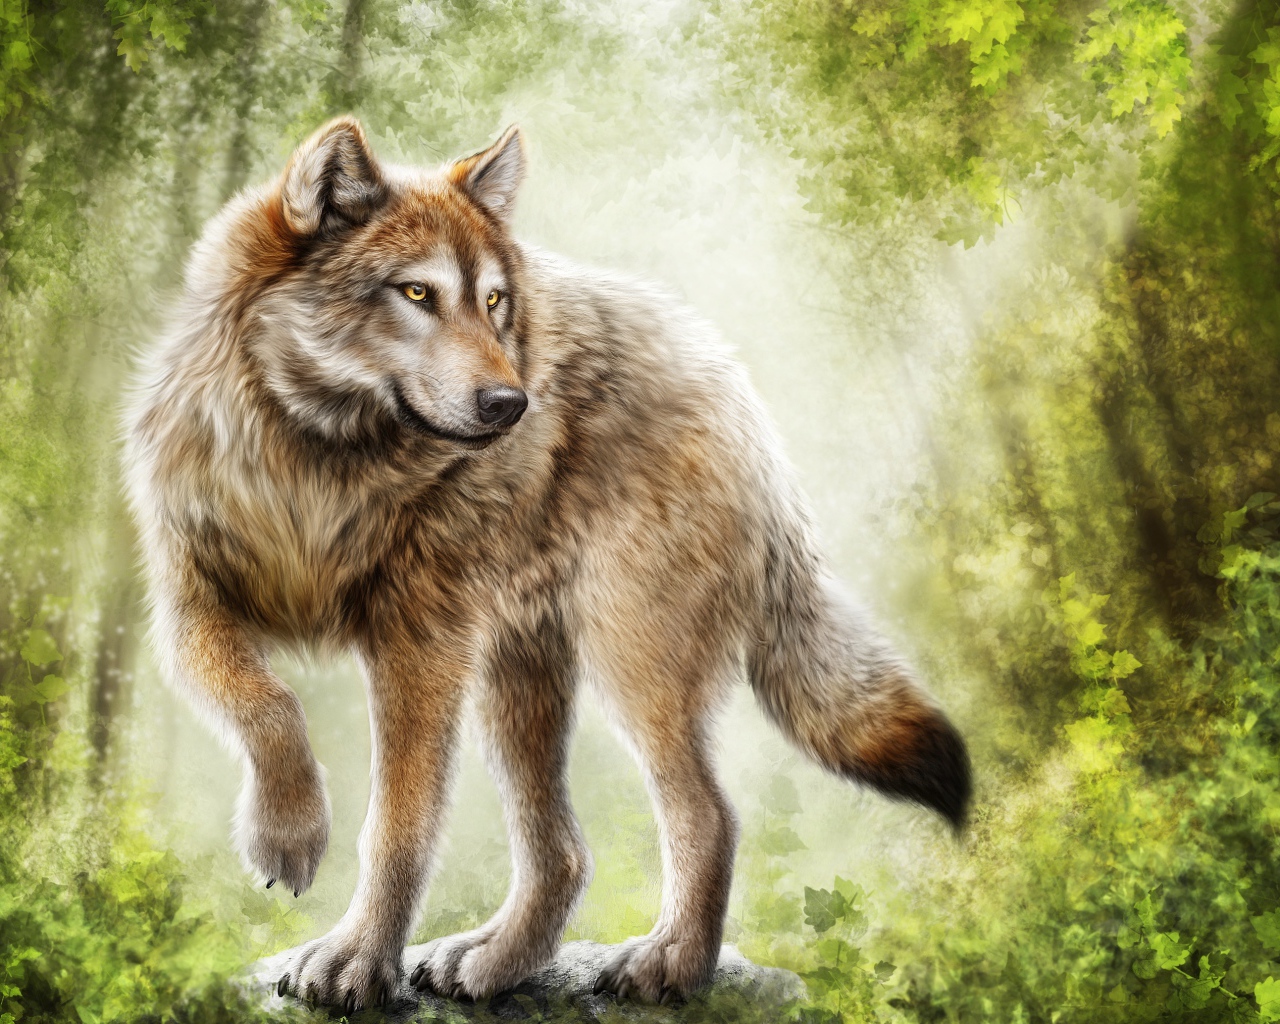 Painted big wolf stands in the woods